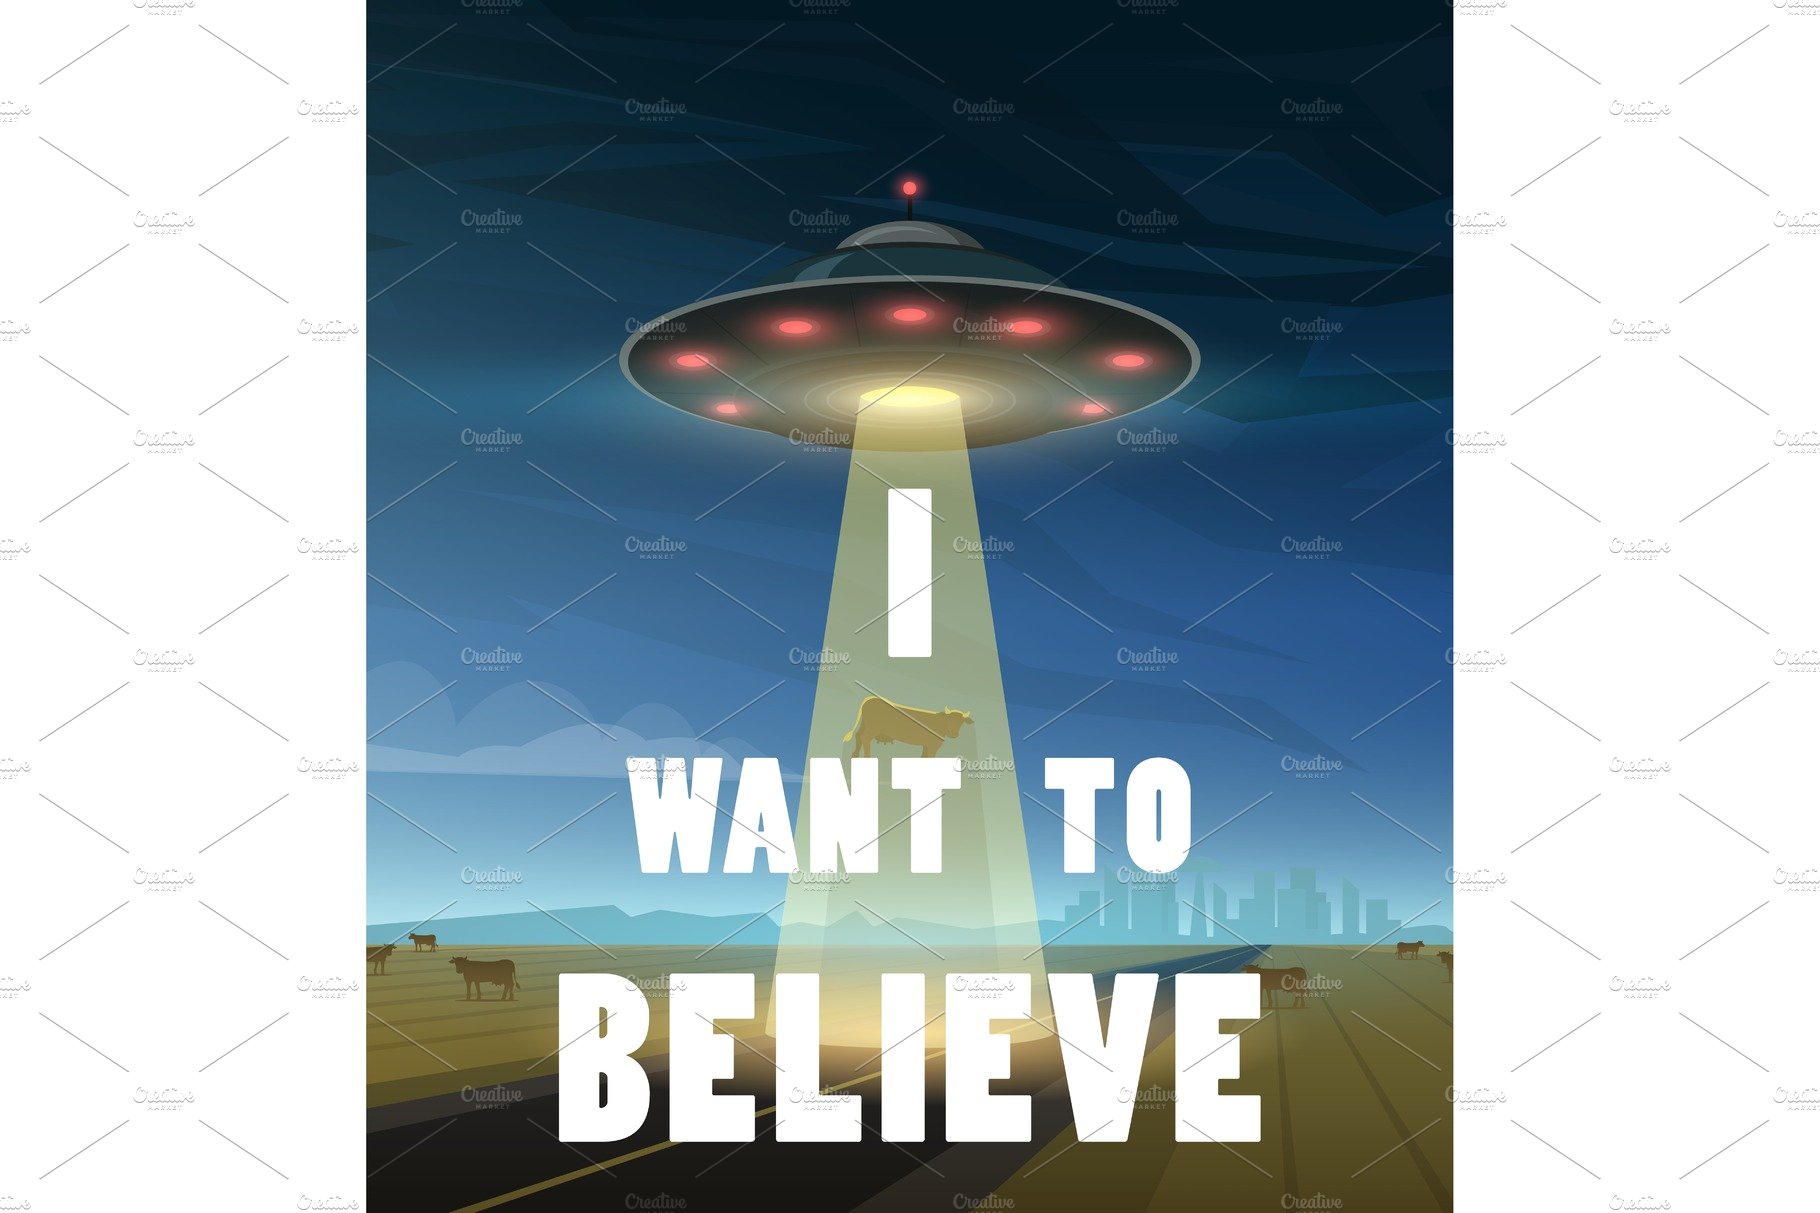 UFO or Flying saucer in space cover image.